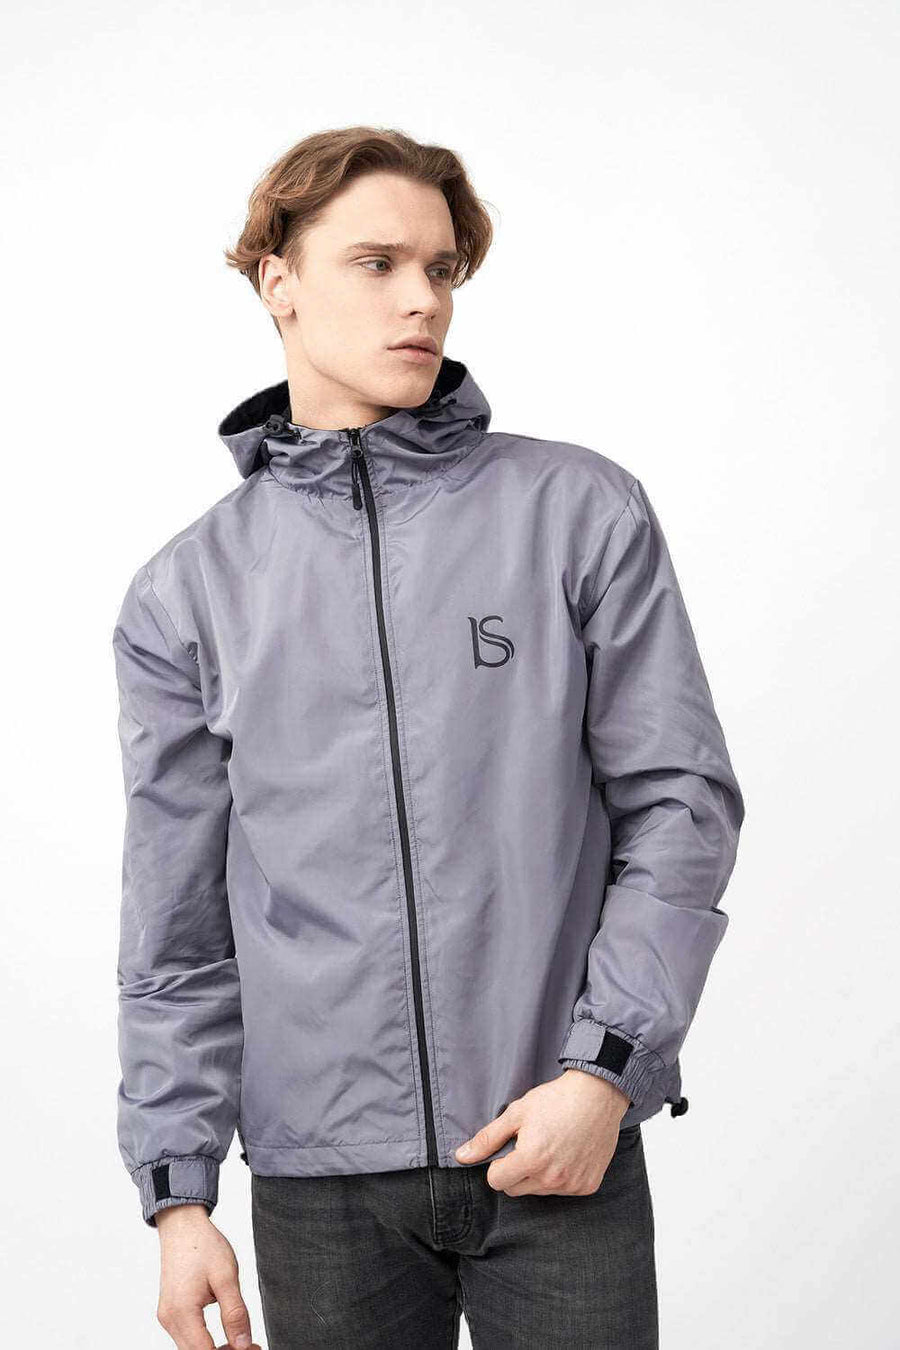 Side View of Fully Zipped Men's Hooded Jacket with Adjustable Cuffs